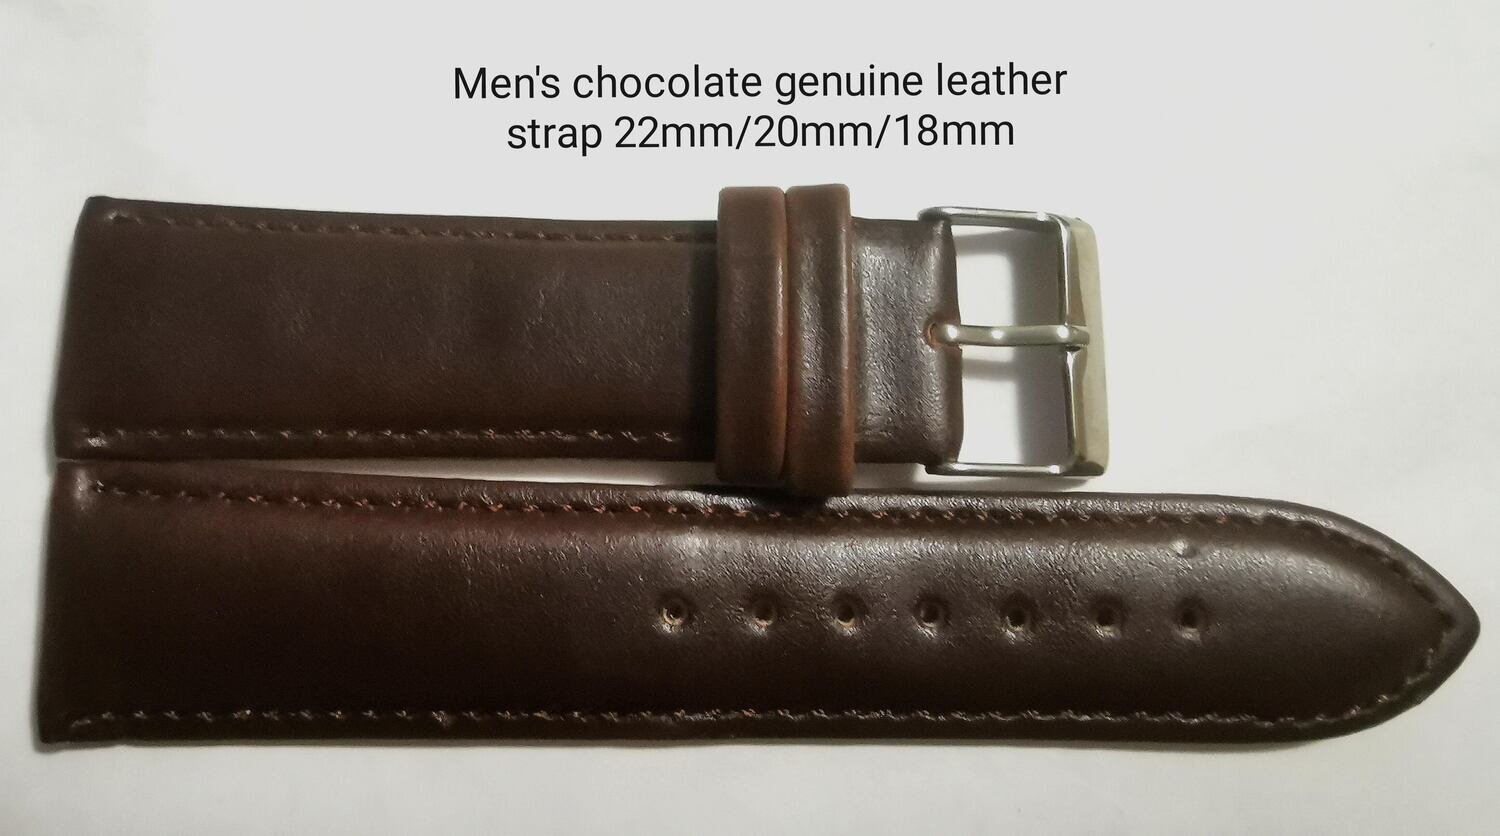 Men's chocolate genuine leather strap 18mm/20mm/22mm